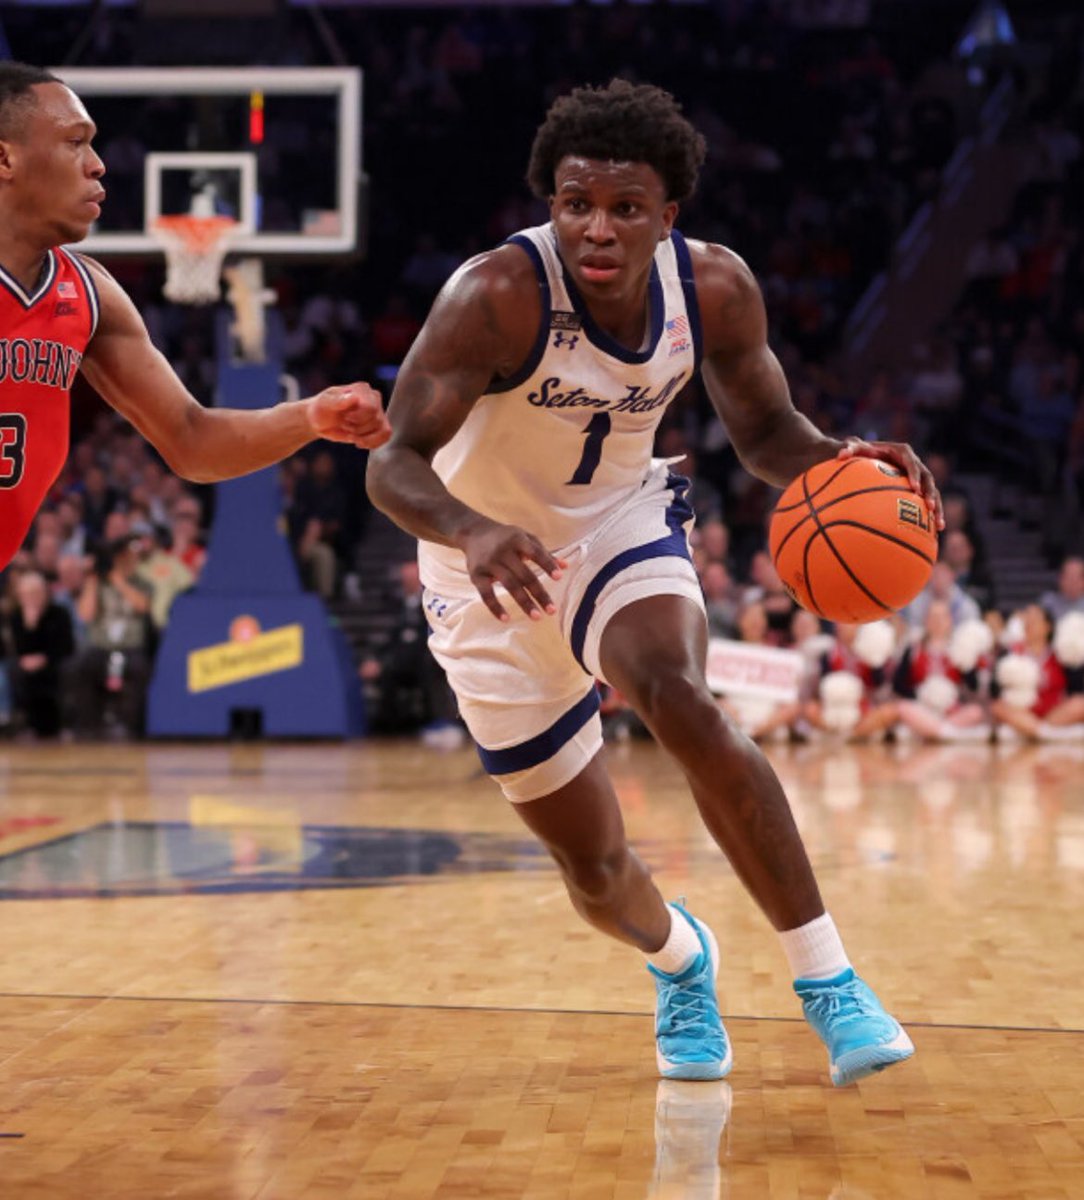 BREAKING: Former Seton Hall star Kadary Richmond, the No. 1 player to enter the portal this spring, has committed to St. John's, he told me and @DraftExpress. First-team All-Big East guard. Second major commitment for the Red Storm in as many days. STORY: espn.com/mens-college-b…